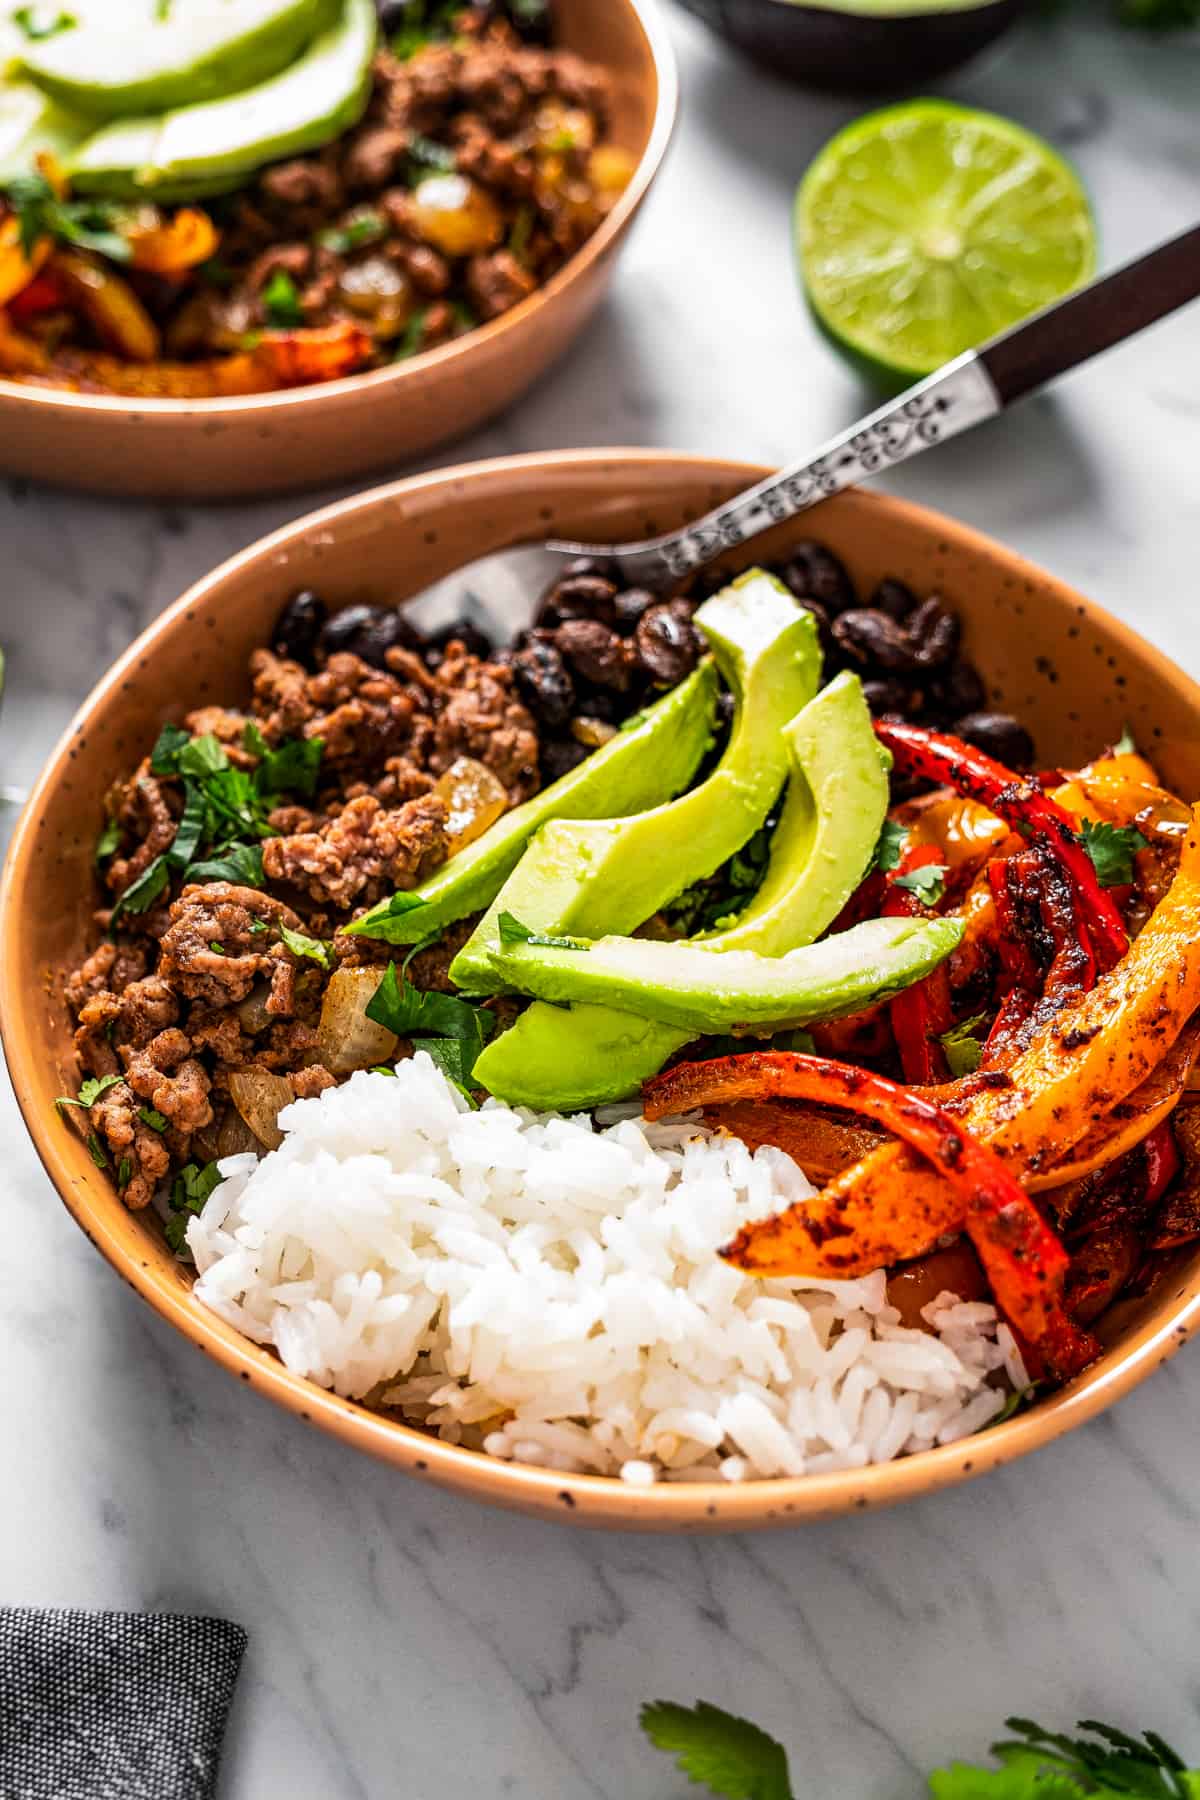 Two taco bowls with taco meat, sliced bell peppers, avocado slices, beans, and rice.